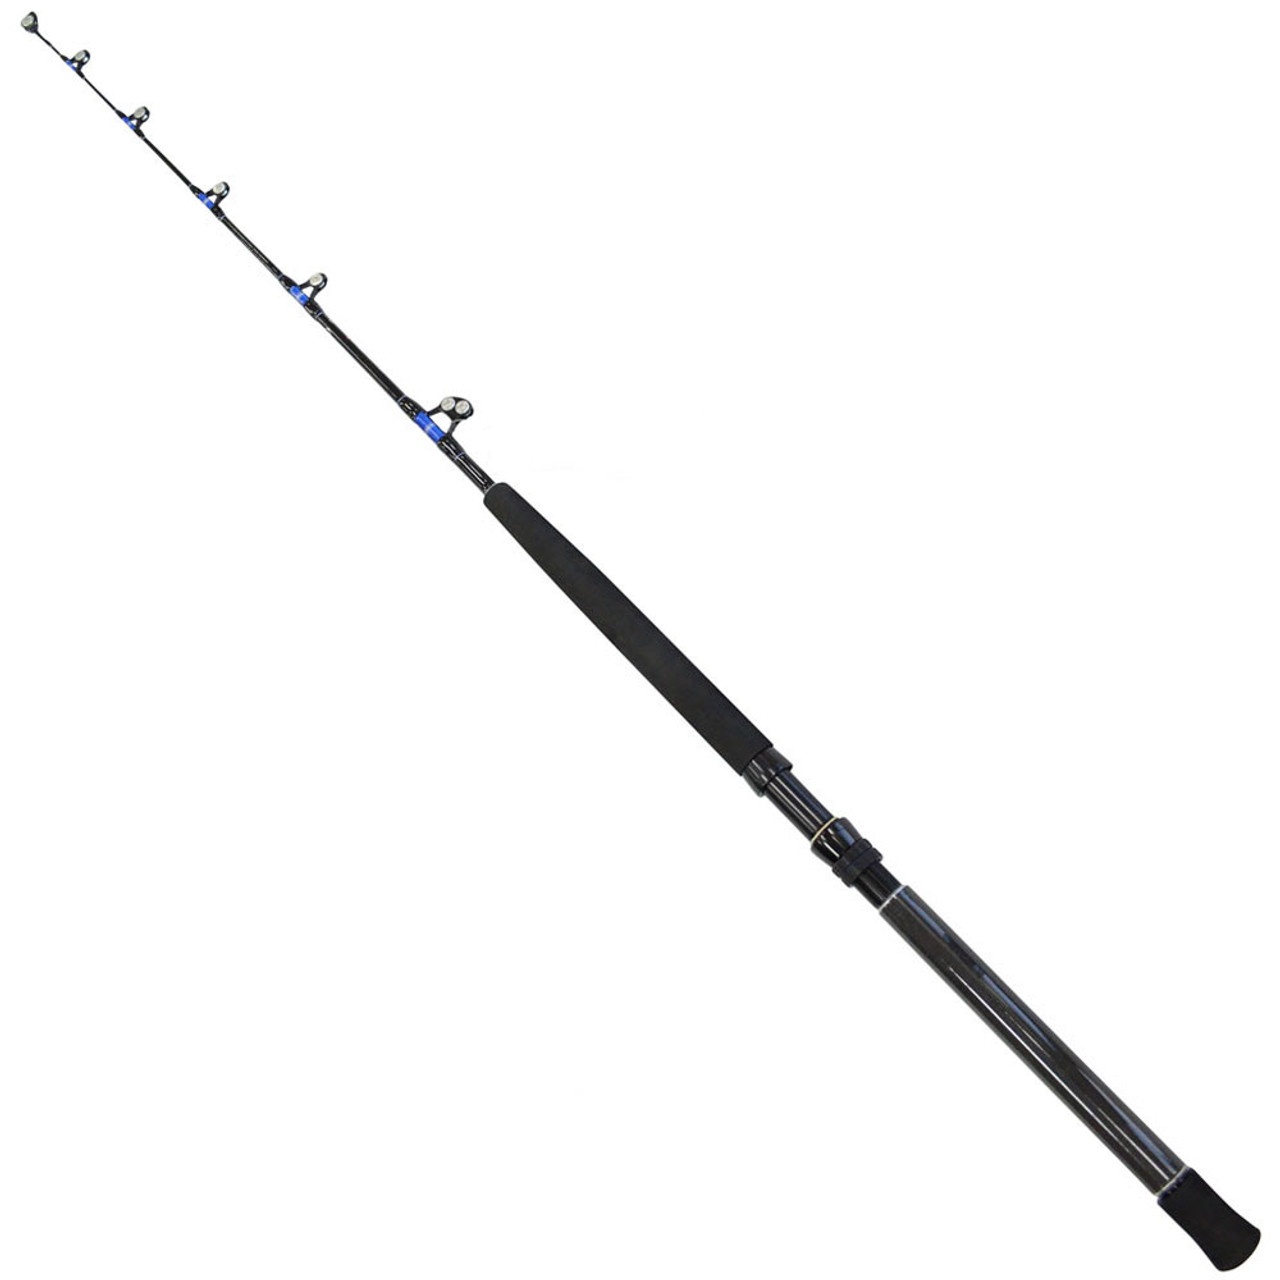 https://cdn11.bigcommerce.com/s-55834/images/stencil/1280x1280/products/4502/16624/shimano-tag-em-game-rod__31934.1647819469.jpg?c=2